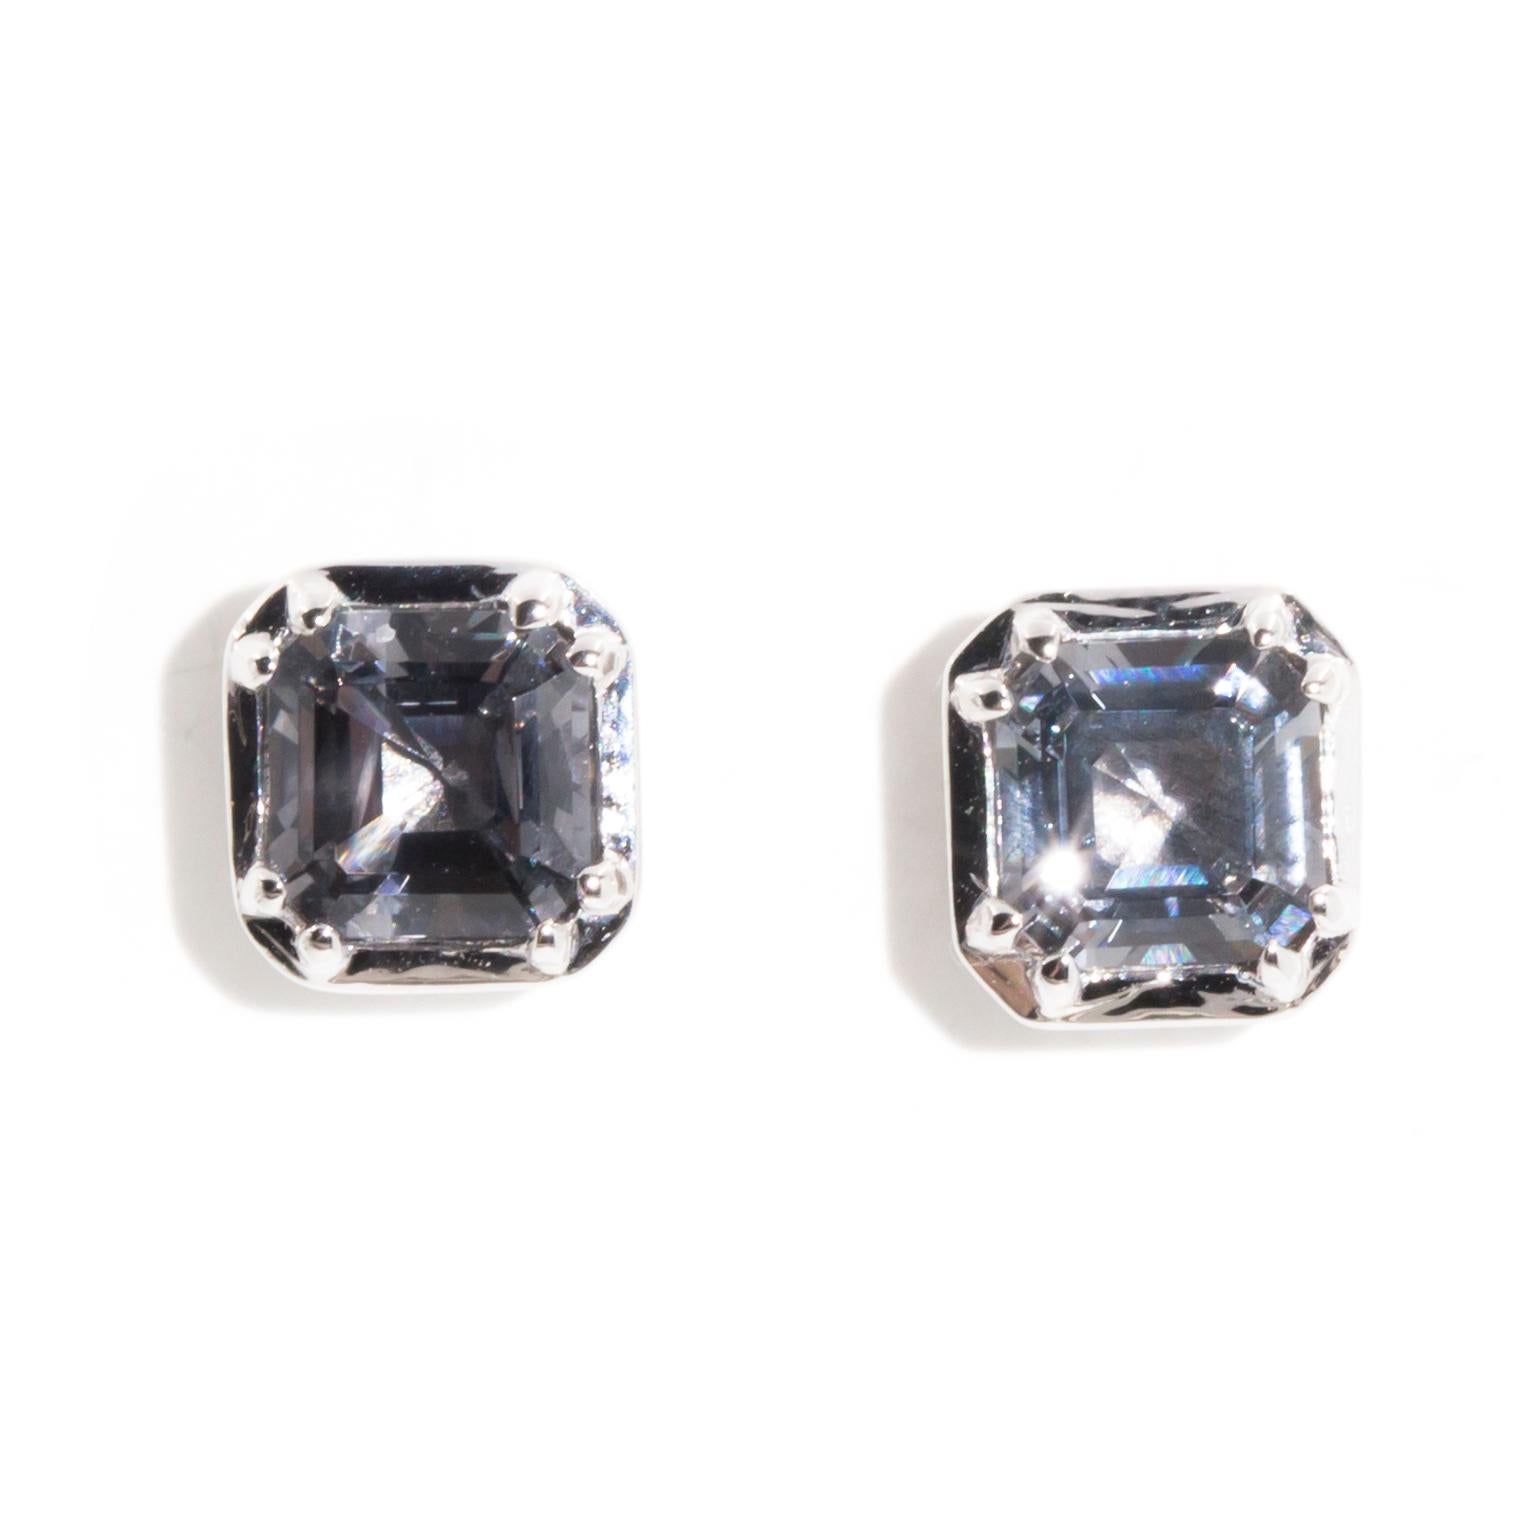 Blue Grey Spinel Contemporary Stud Style Earrings in 9 Carat White Gold 6